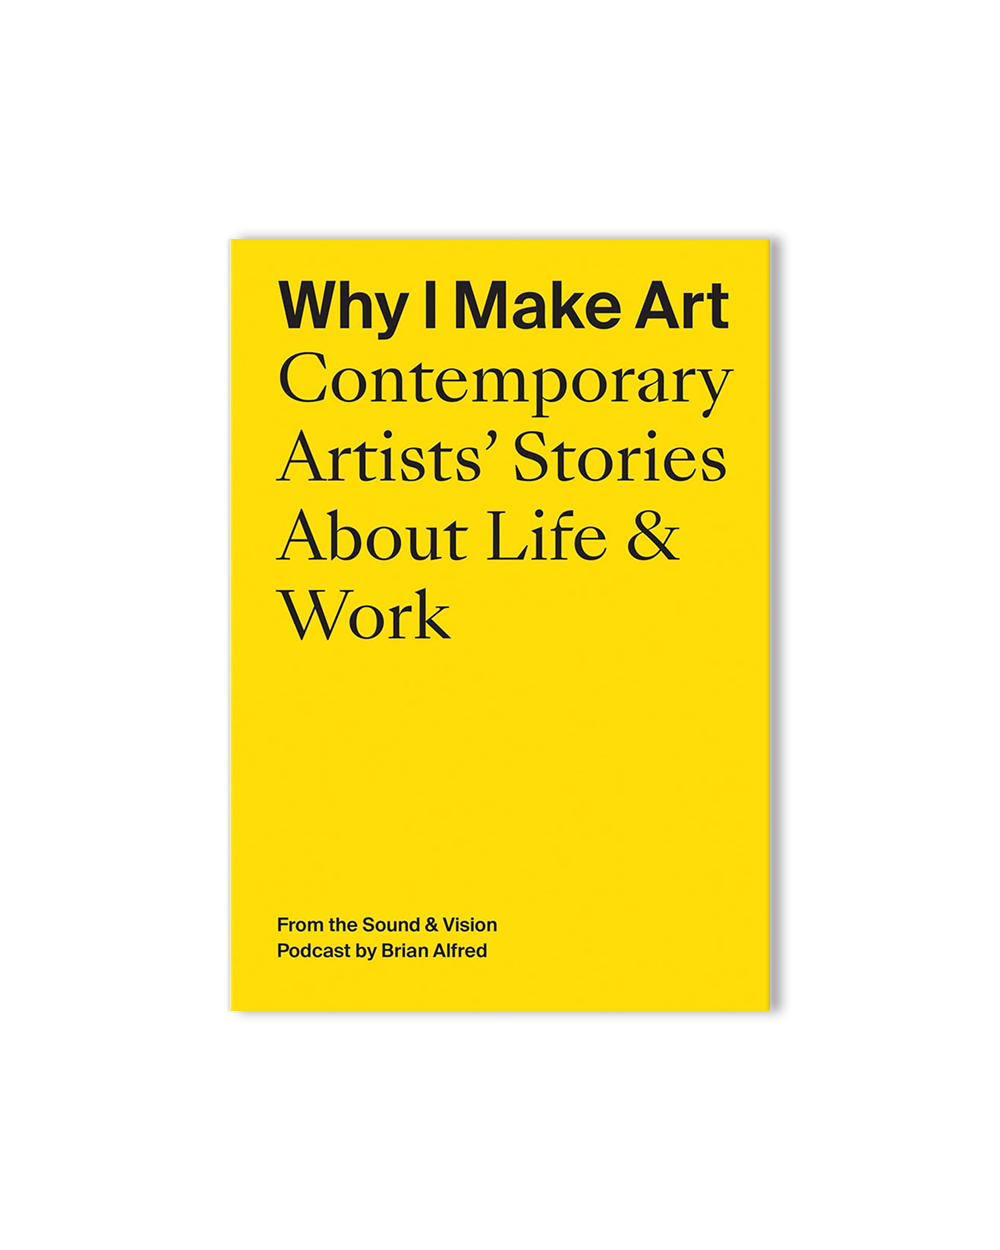 Why I Make Art - Contemporary Artists' Stories About Life & Work